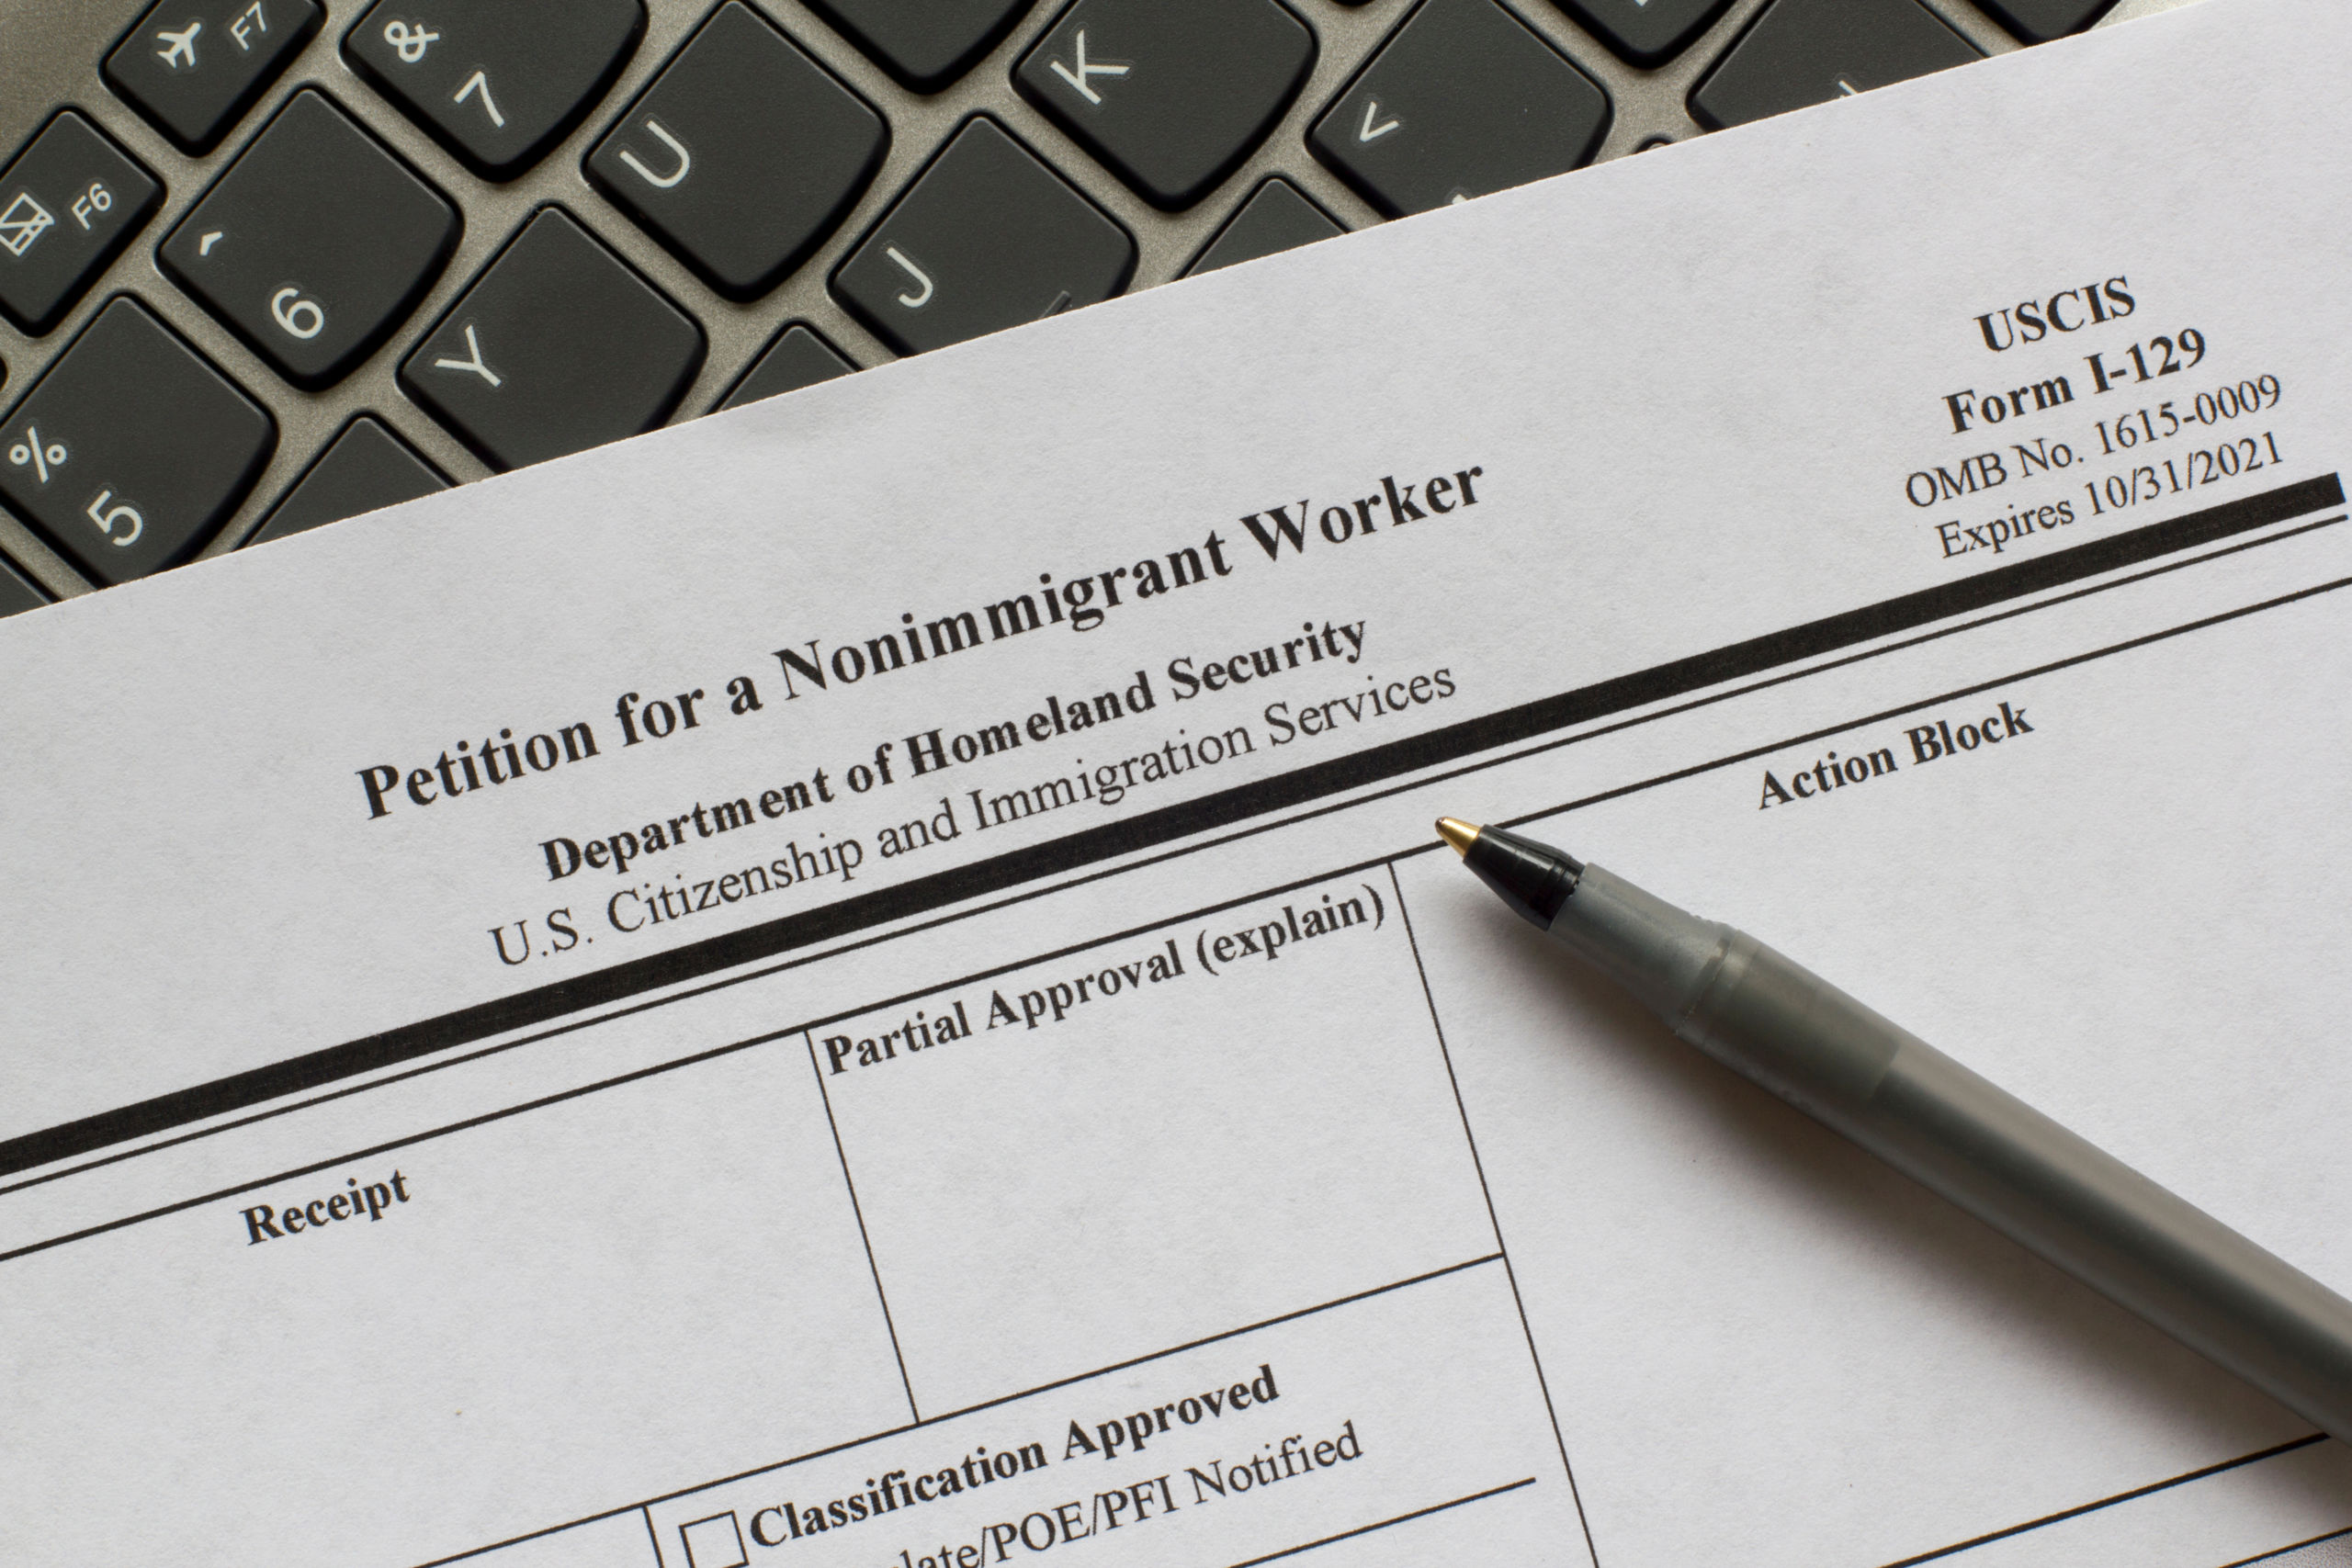 a petition for a nonimmigrant worker